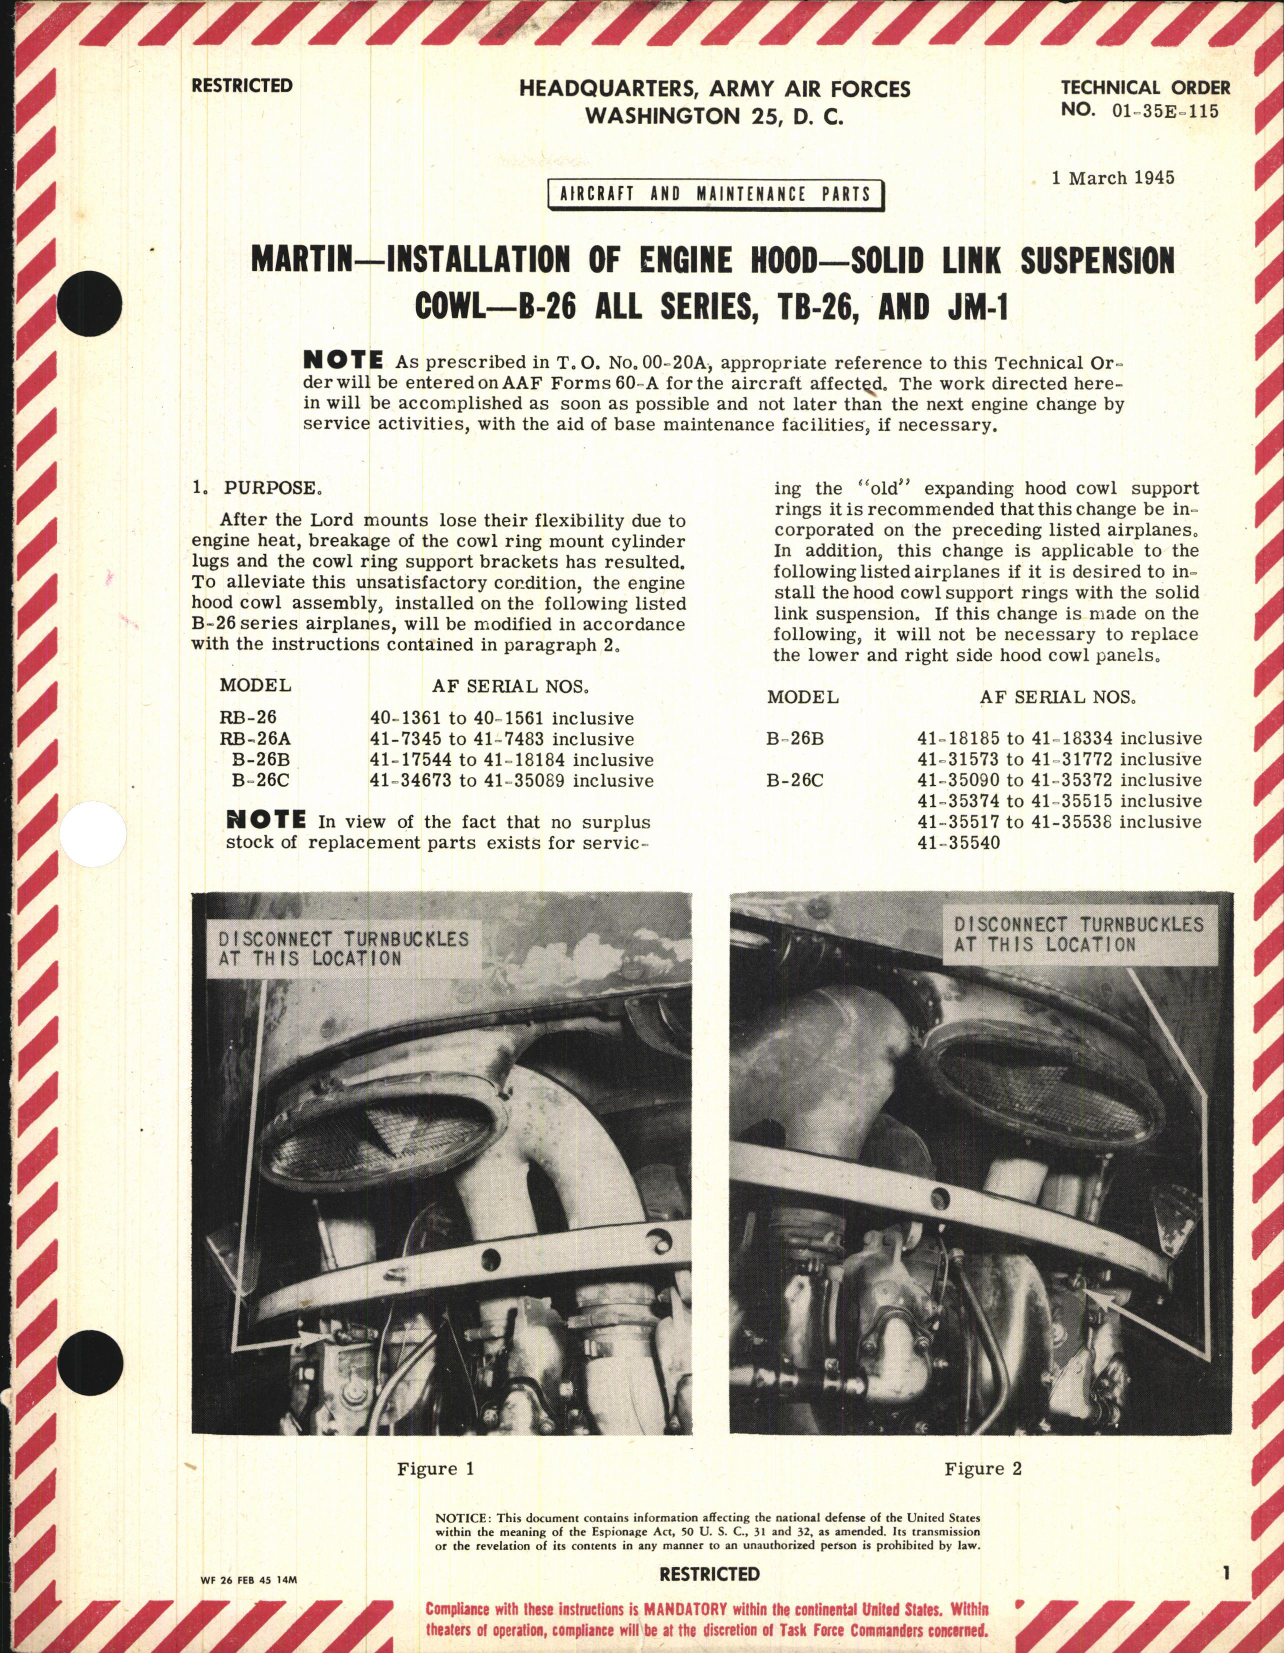 Sample page 1 from AirCorps Library document: Installation of Engine Hood - Solid Link Suspension Cowl - For B-26 All Series, TB-26, and JM-1